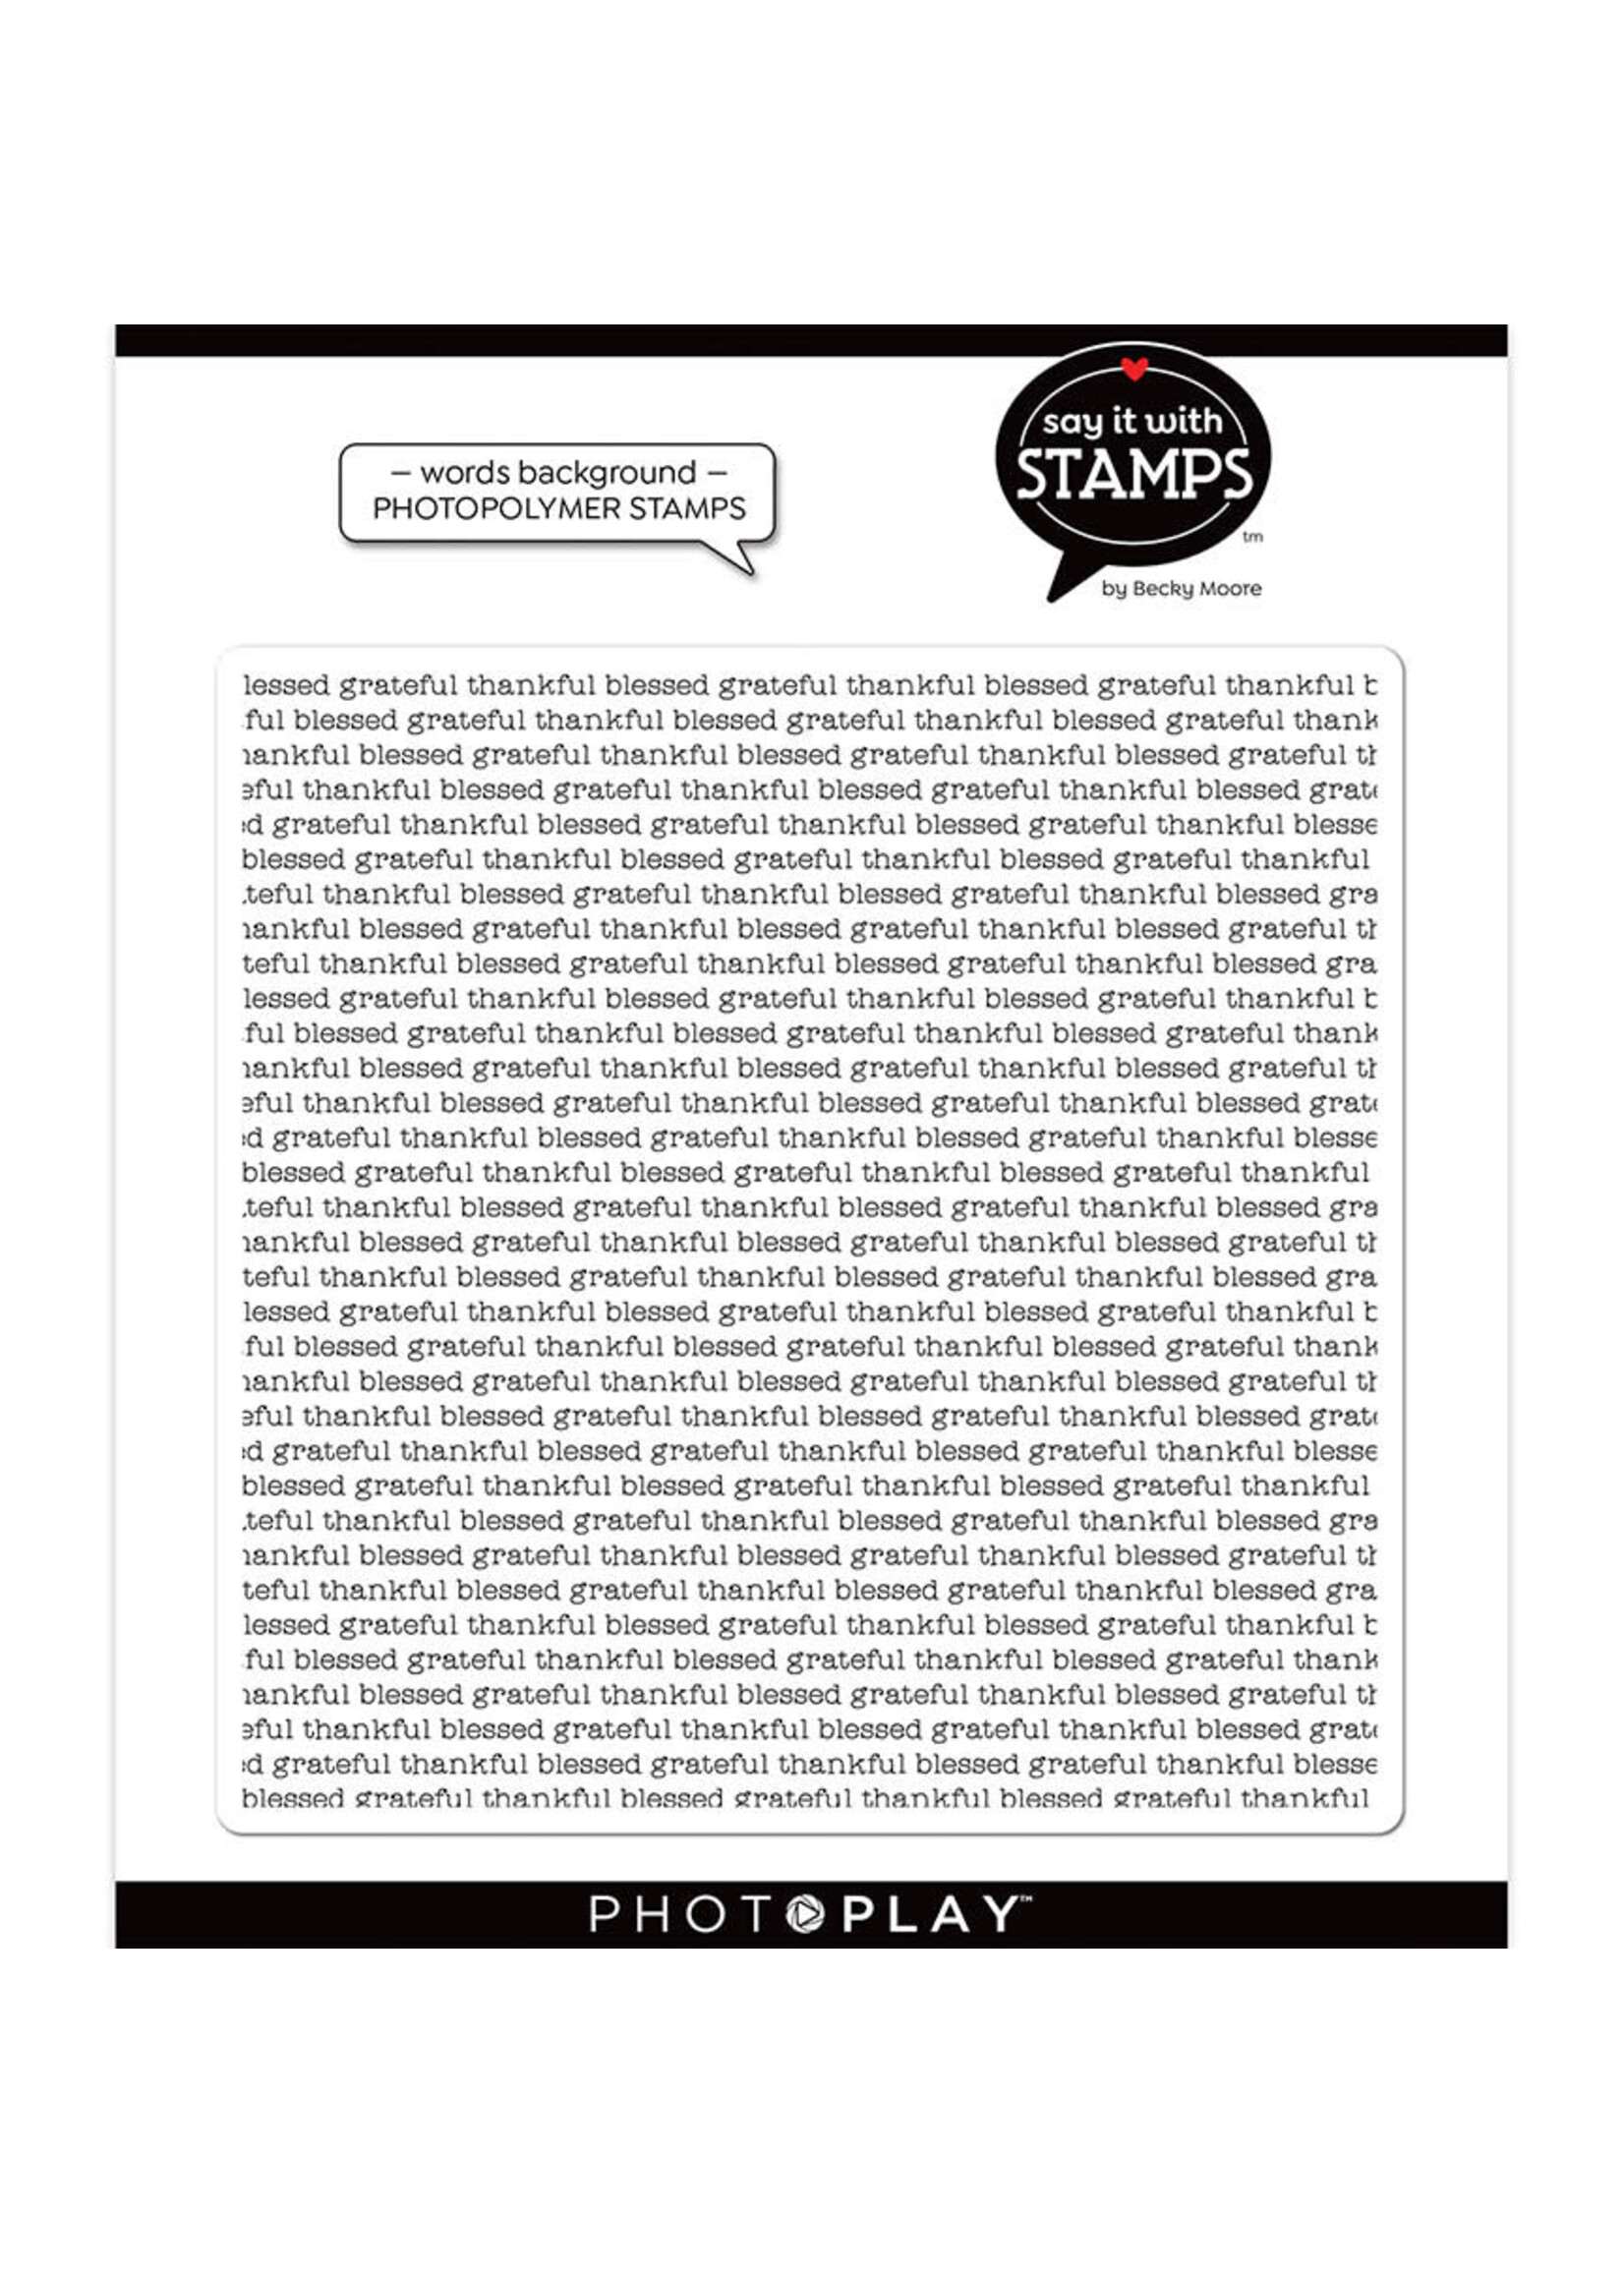 Photoplay Grateful Thankful Blessed Background Stamp 6x6